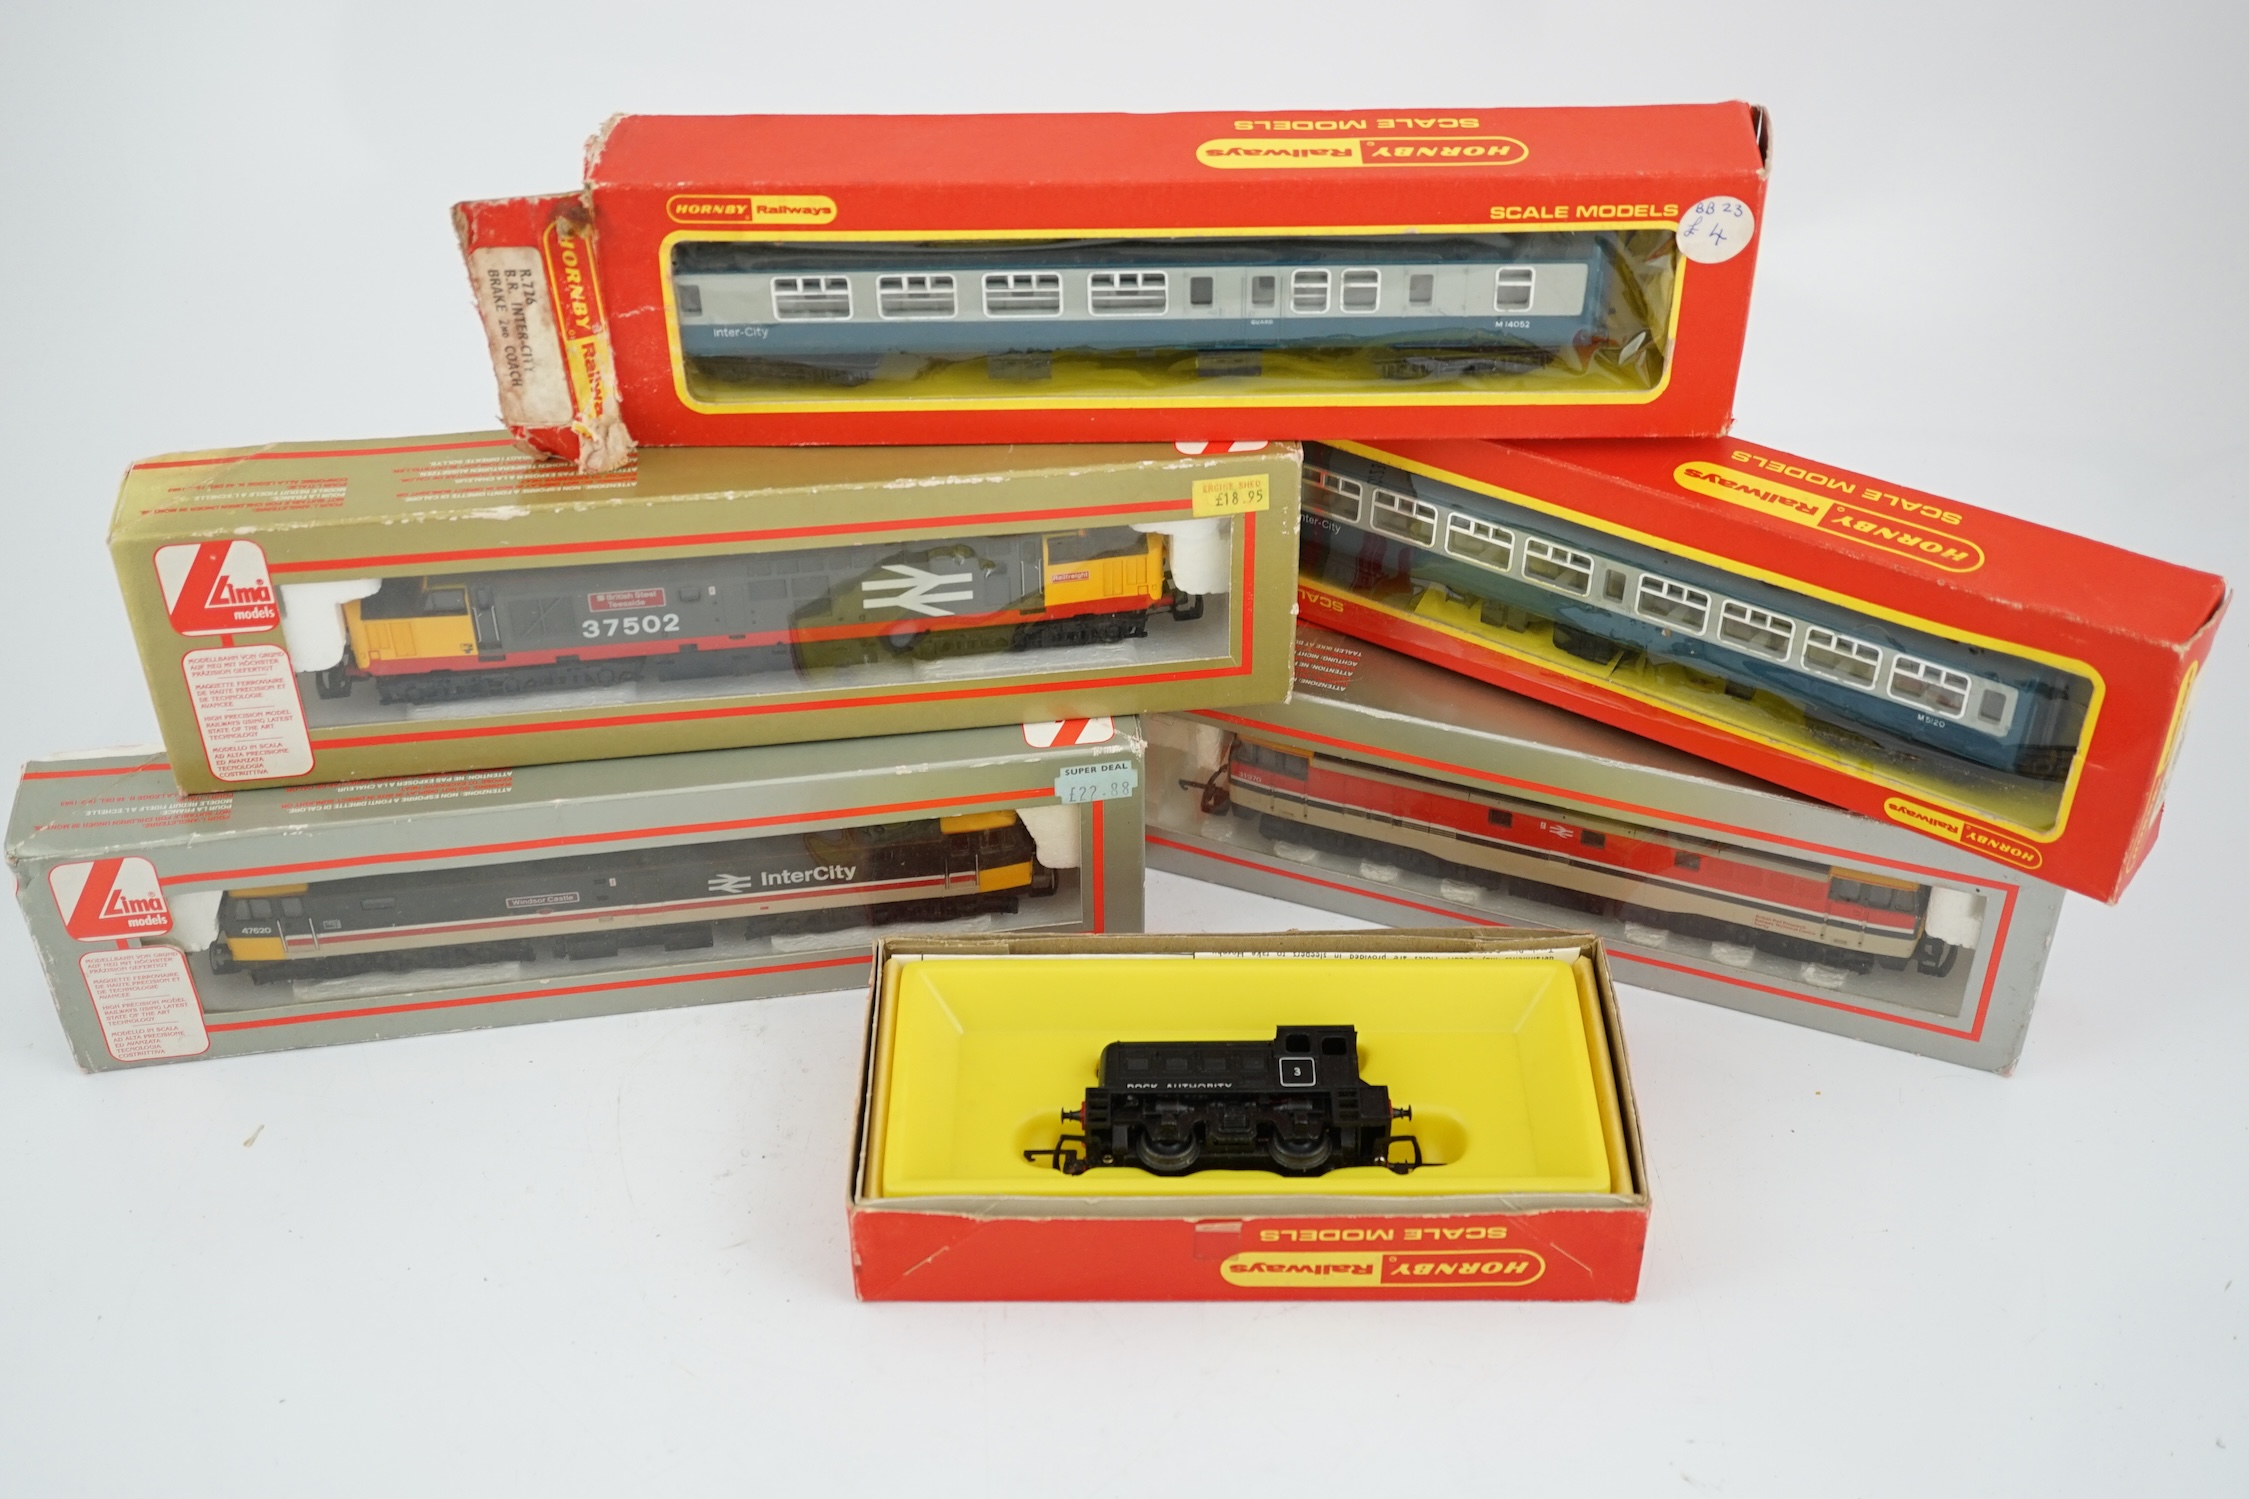 Fifteen 00 gauge model railway items by Hornby Railways, Lima, etc. including six locomotives; a BR Class 37 diesel locomotive, a Class 31 diesel locomotive, an 0-6-0T locomotive, etc. together with six Inter-city bogie